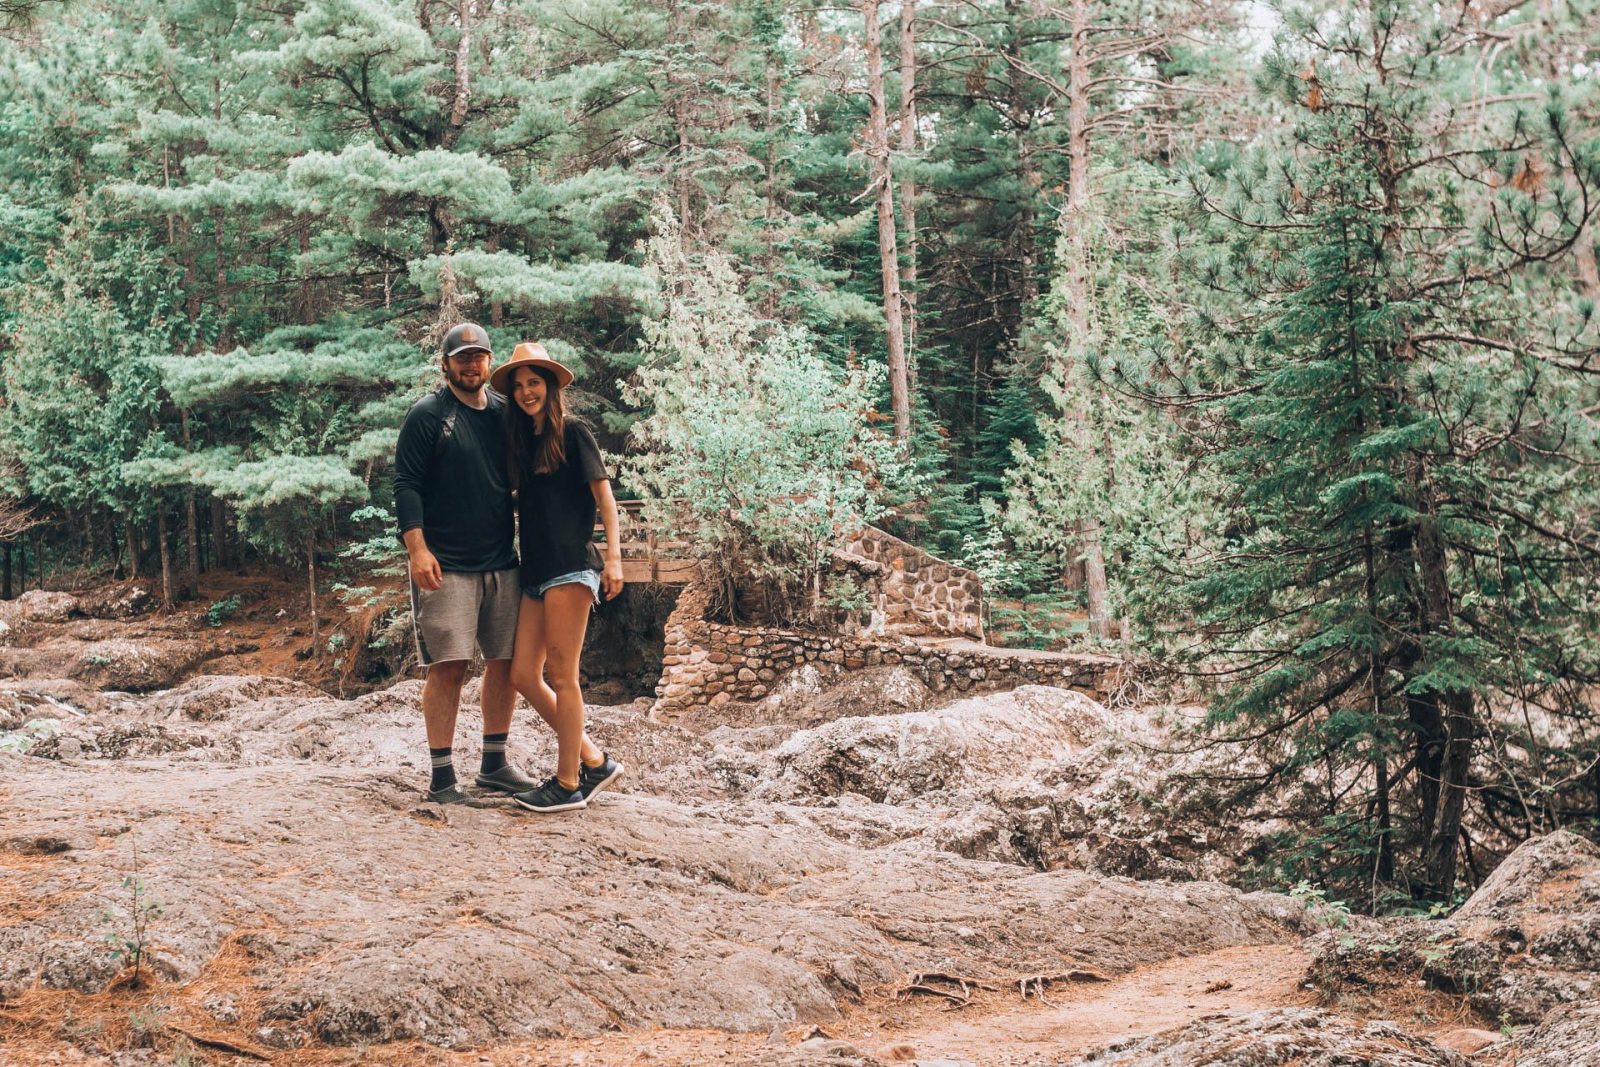 Our engagement story - getting engaged at Amnicon Falls State Park in Wisconsin.